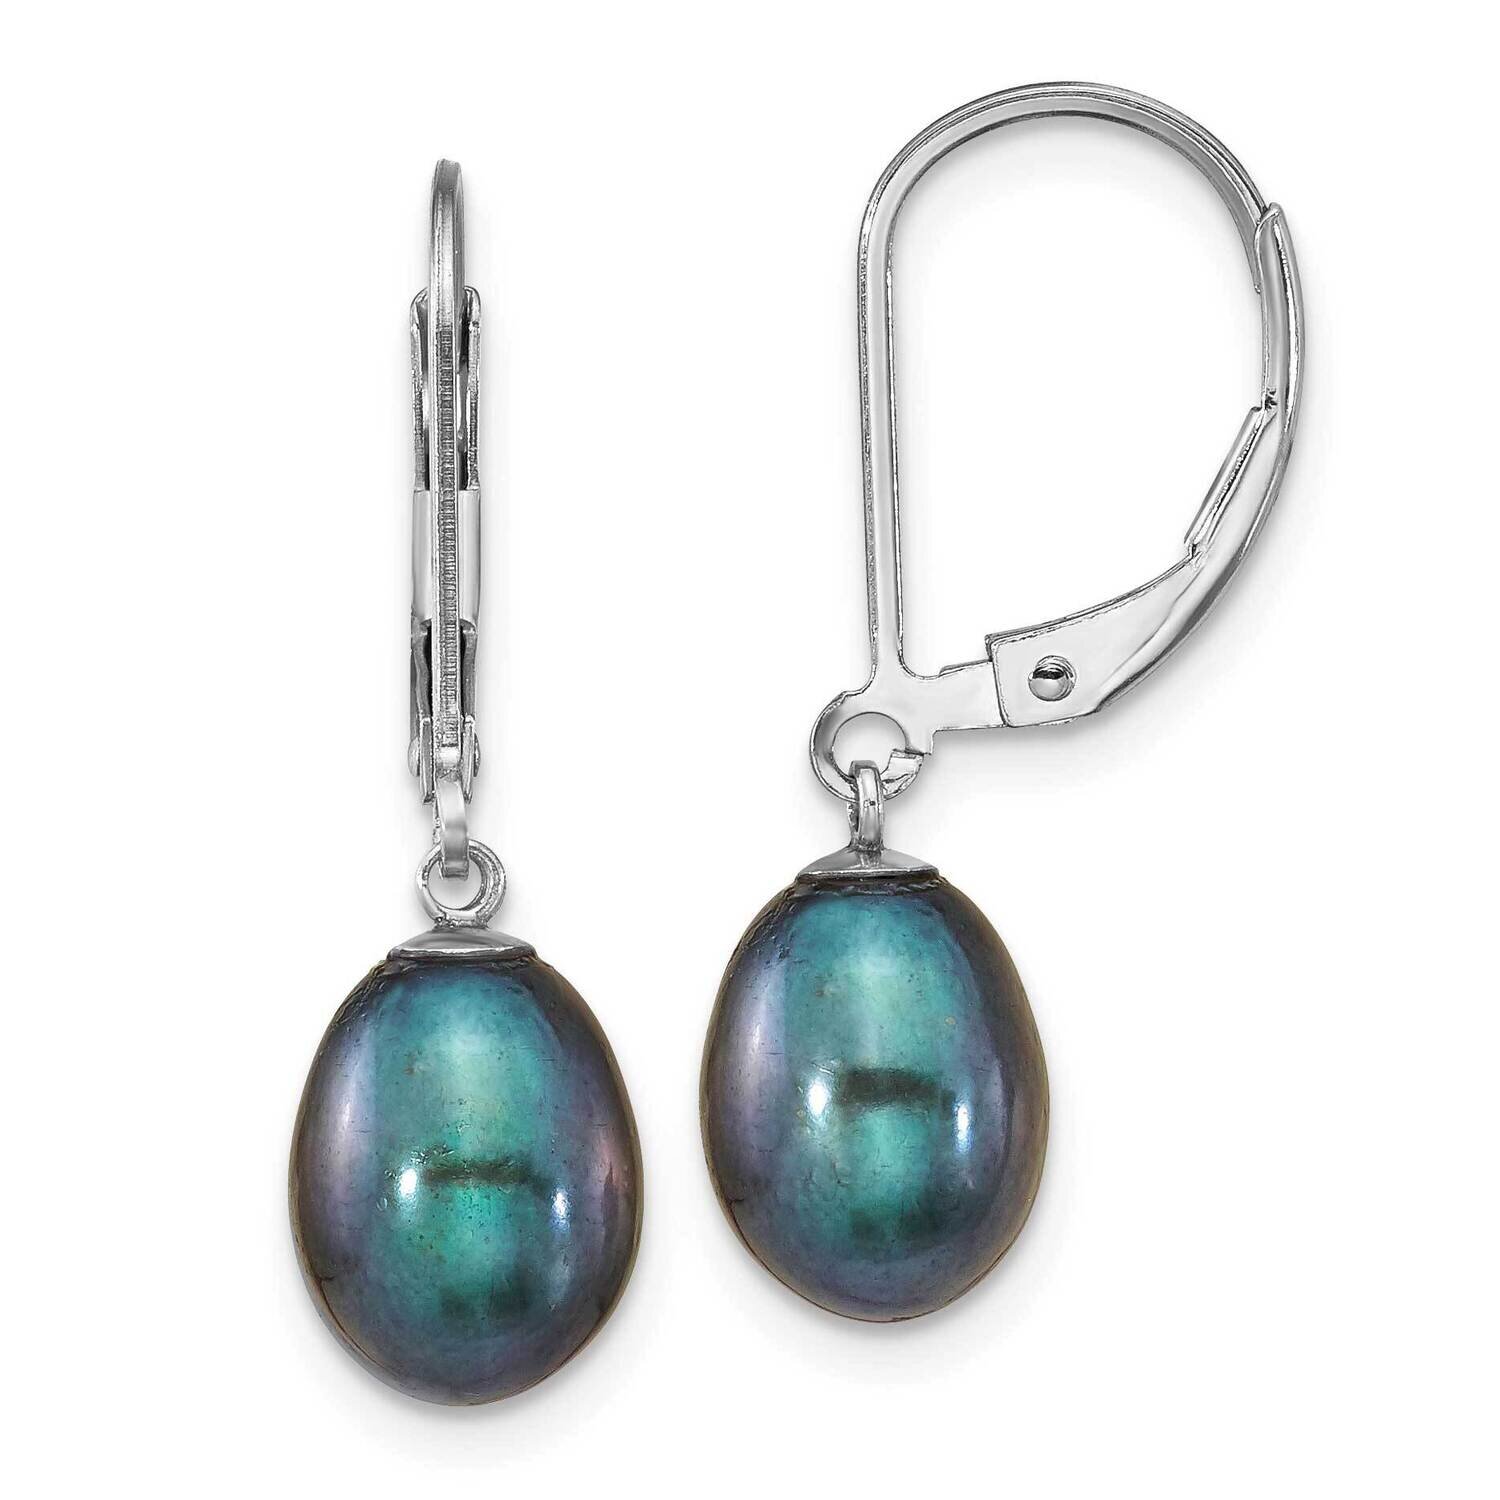 7-8mm Black Rice Fwc Pearl Earrings Sterling Silver Rhodium-Plated QE12781B